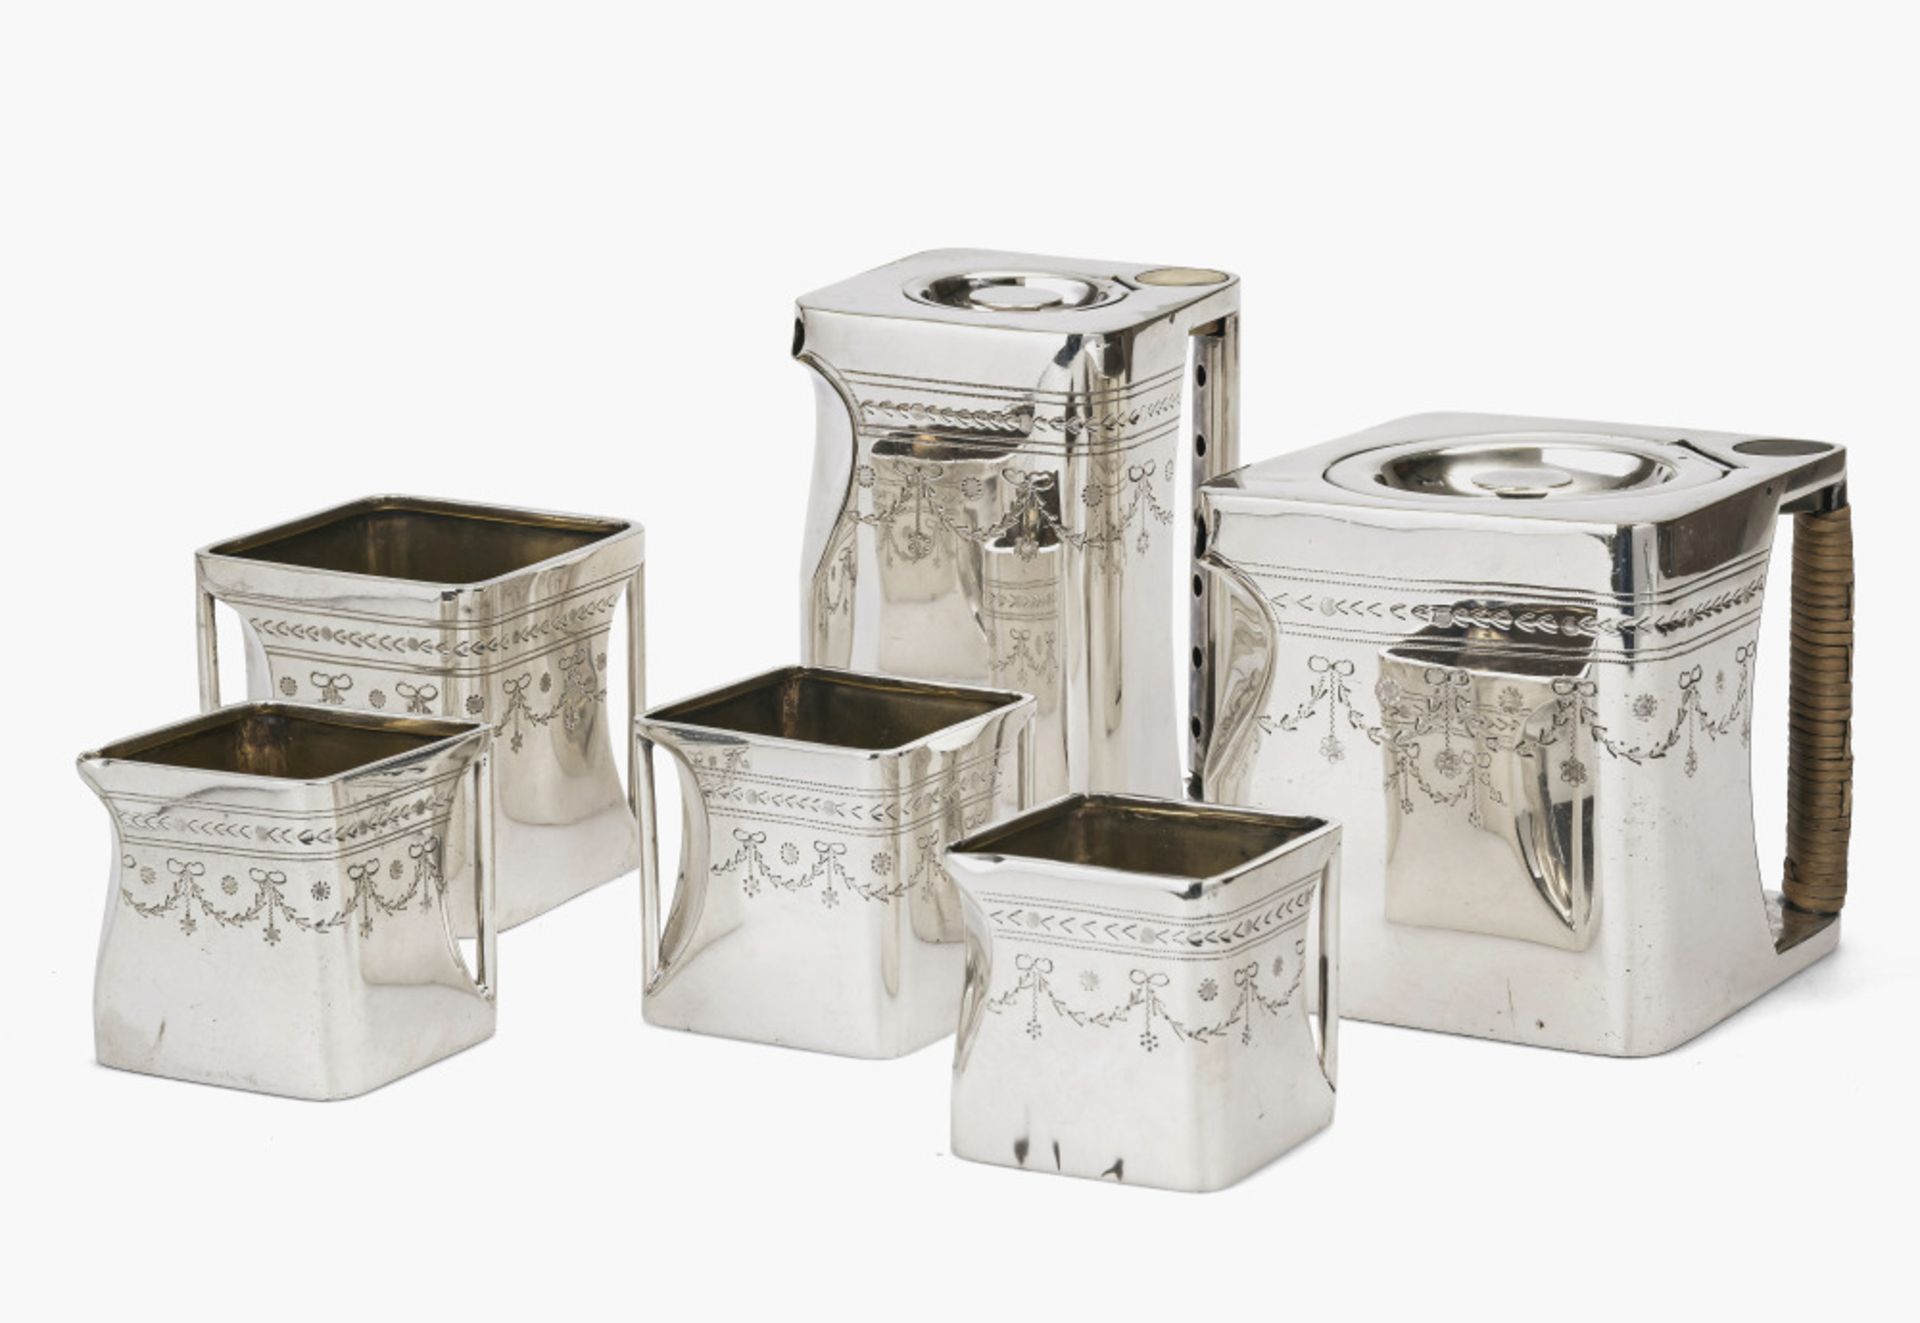 A six-piece tea- and coffee service "The Cube" - Design by Robert Crawford Johnson, manufactured by